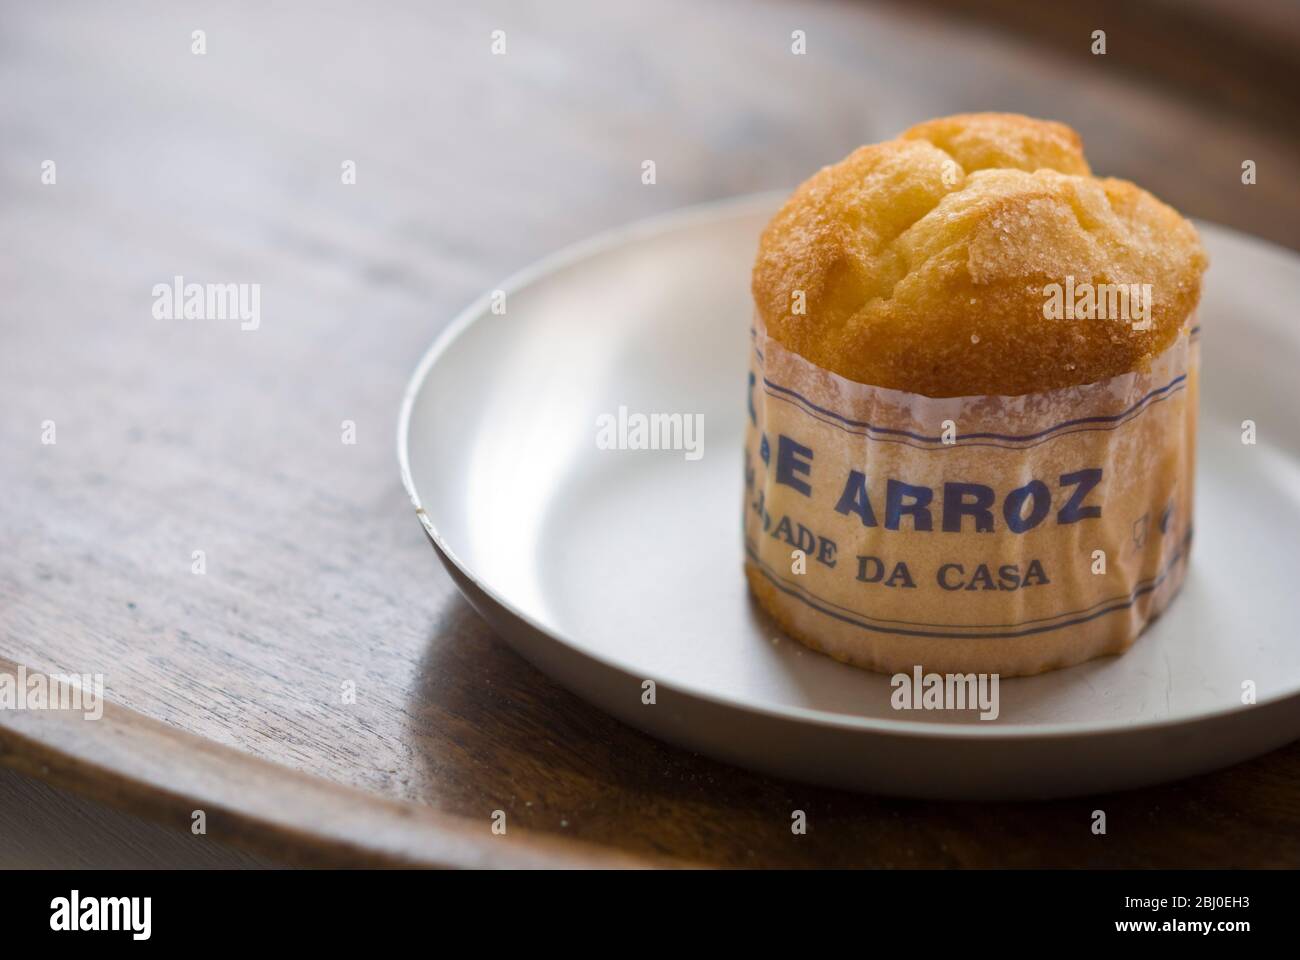 Classic Portuguese muffin type cake made with rice in paper wrapper on metal plate, with cup of black coffee - Stock Photo